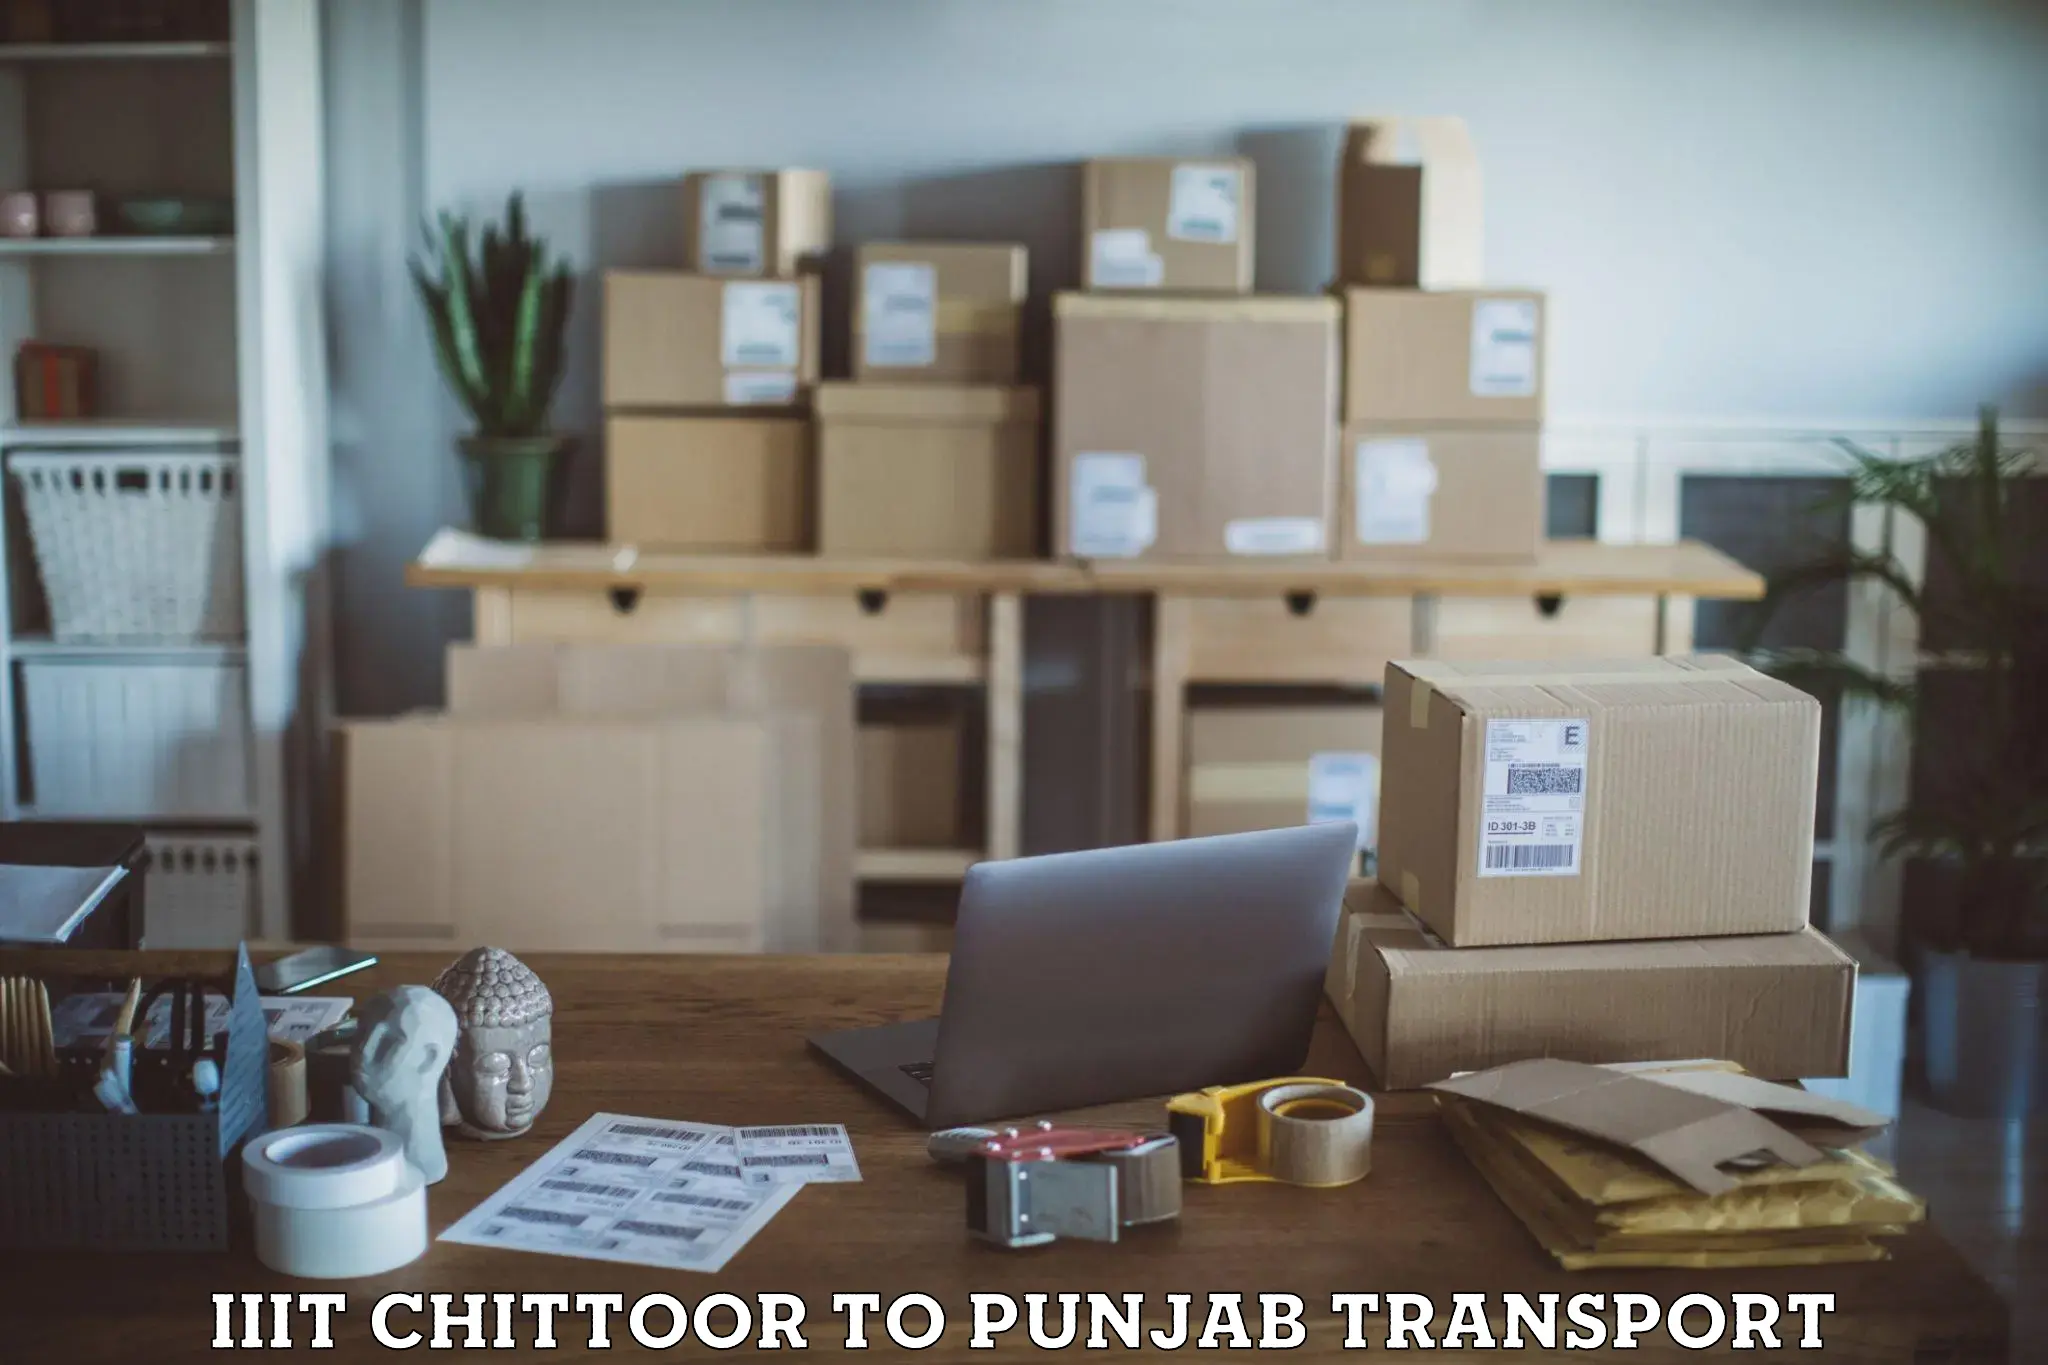 Air freight transport services in IIIT Chittoor to Amritsar